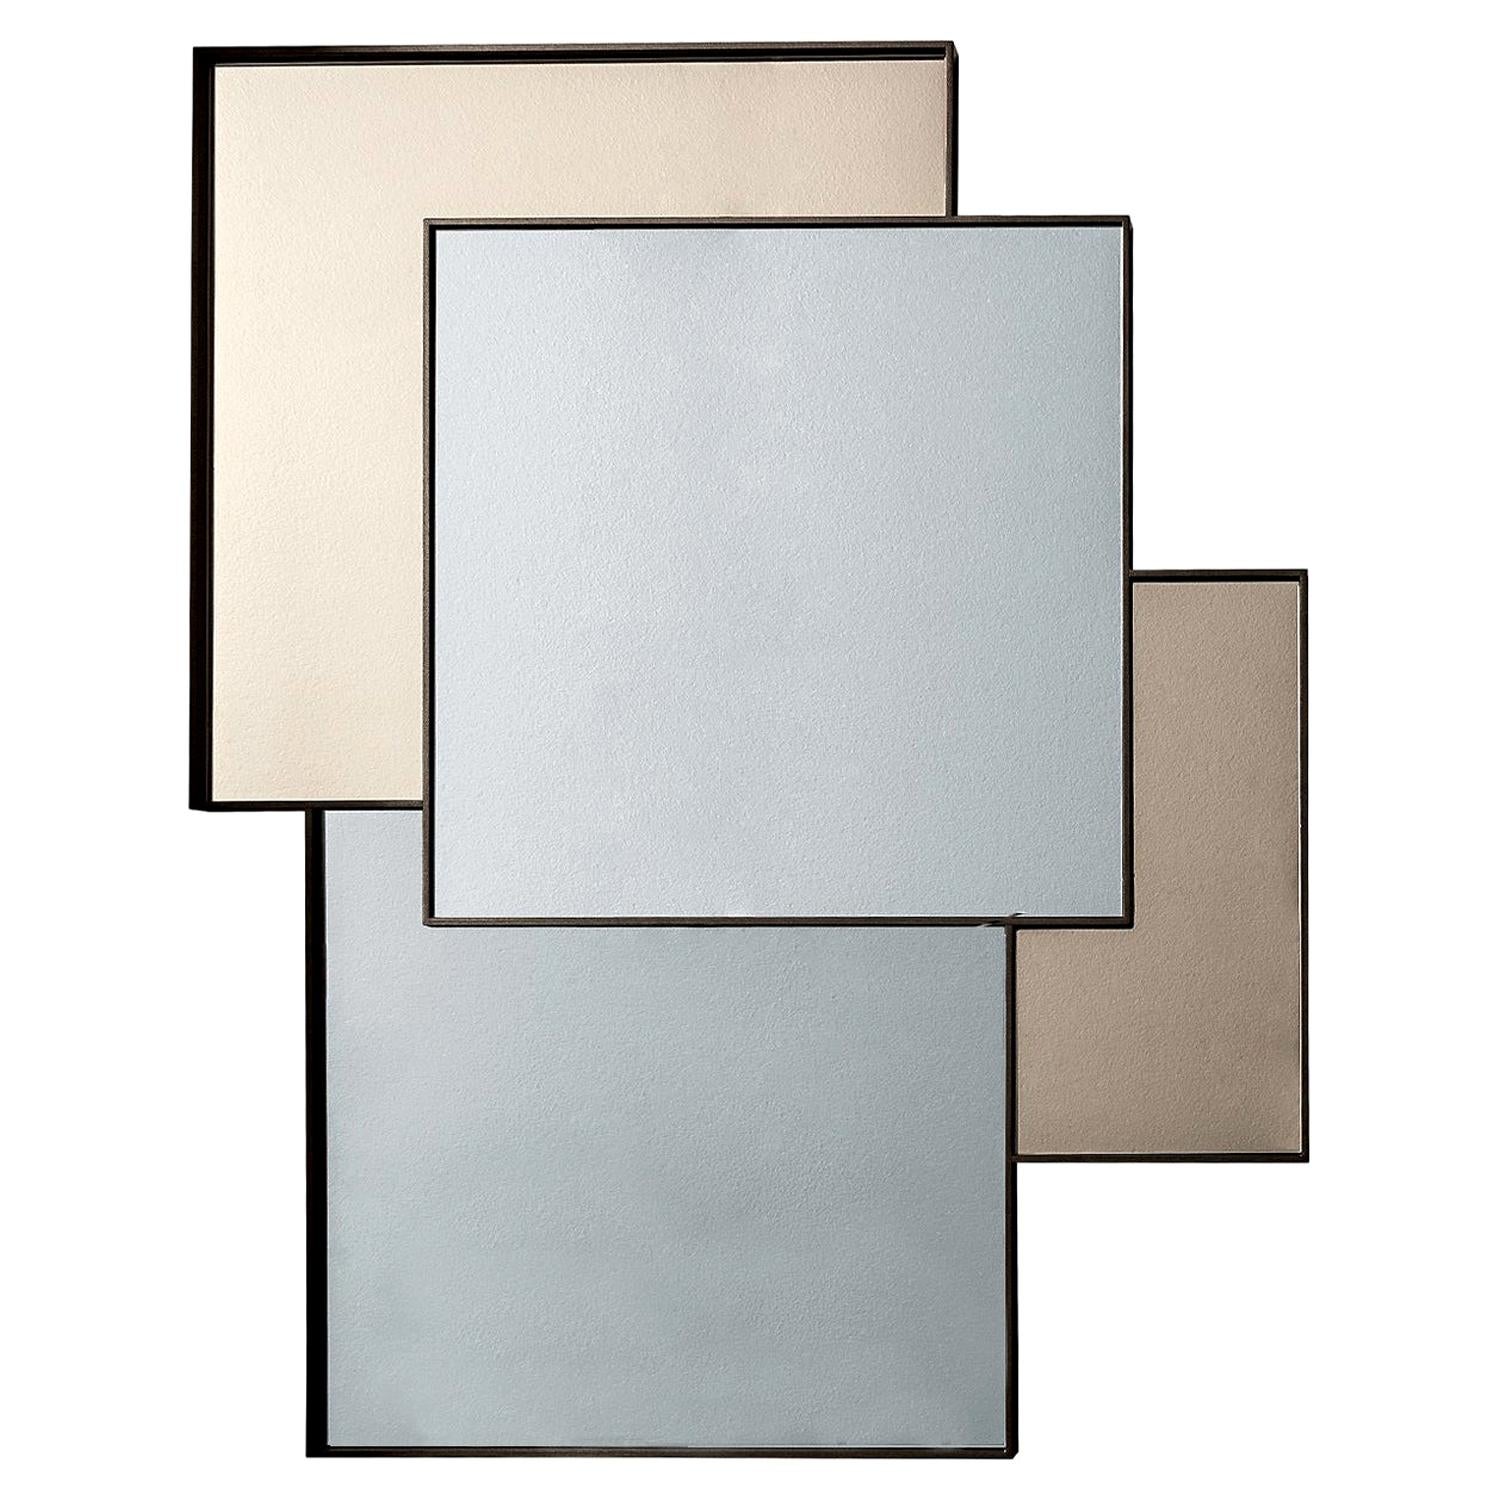 In Stock in Los Angeles, Combi Mirror, by Gianluigi Landoni, Made in Italy